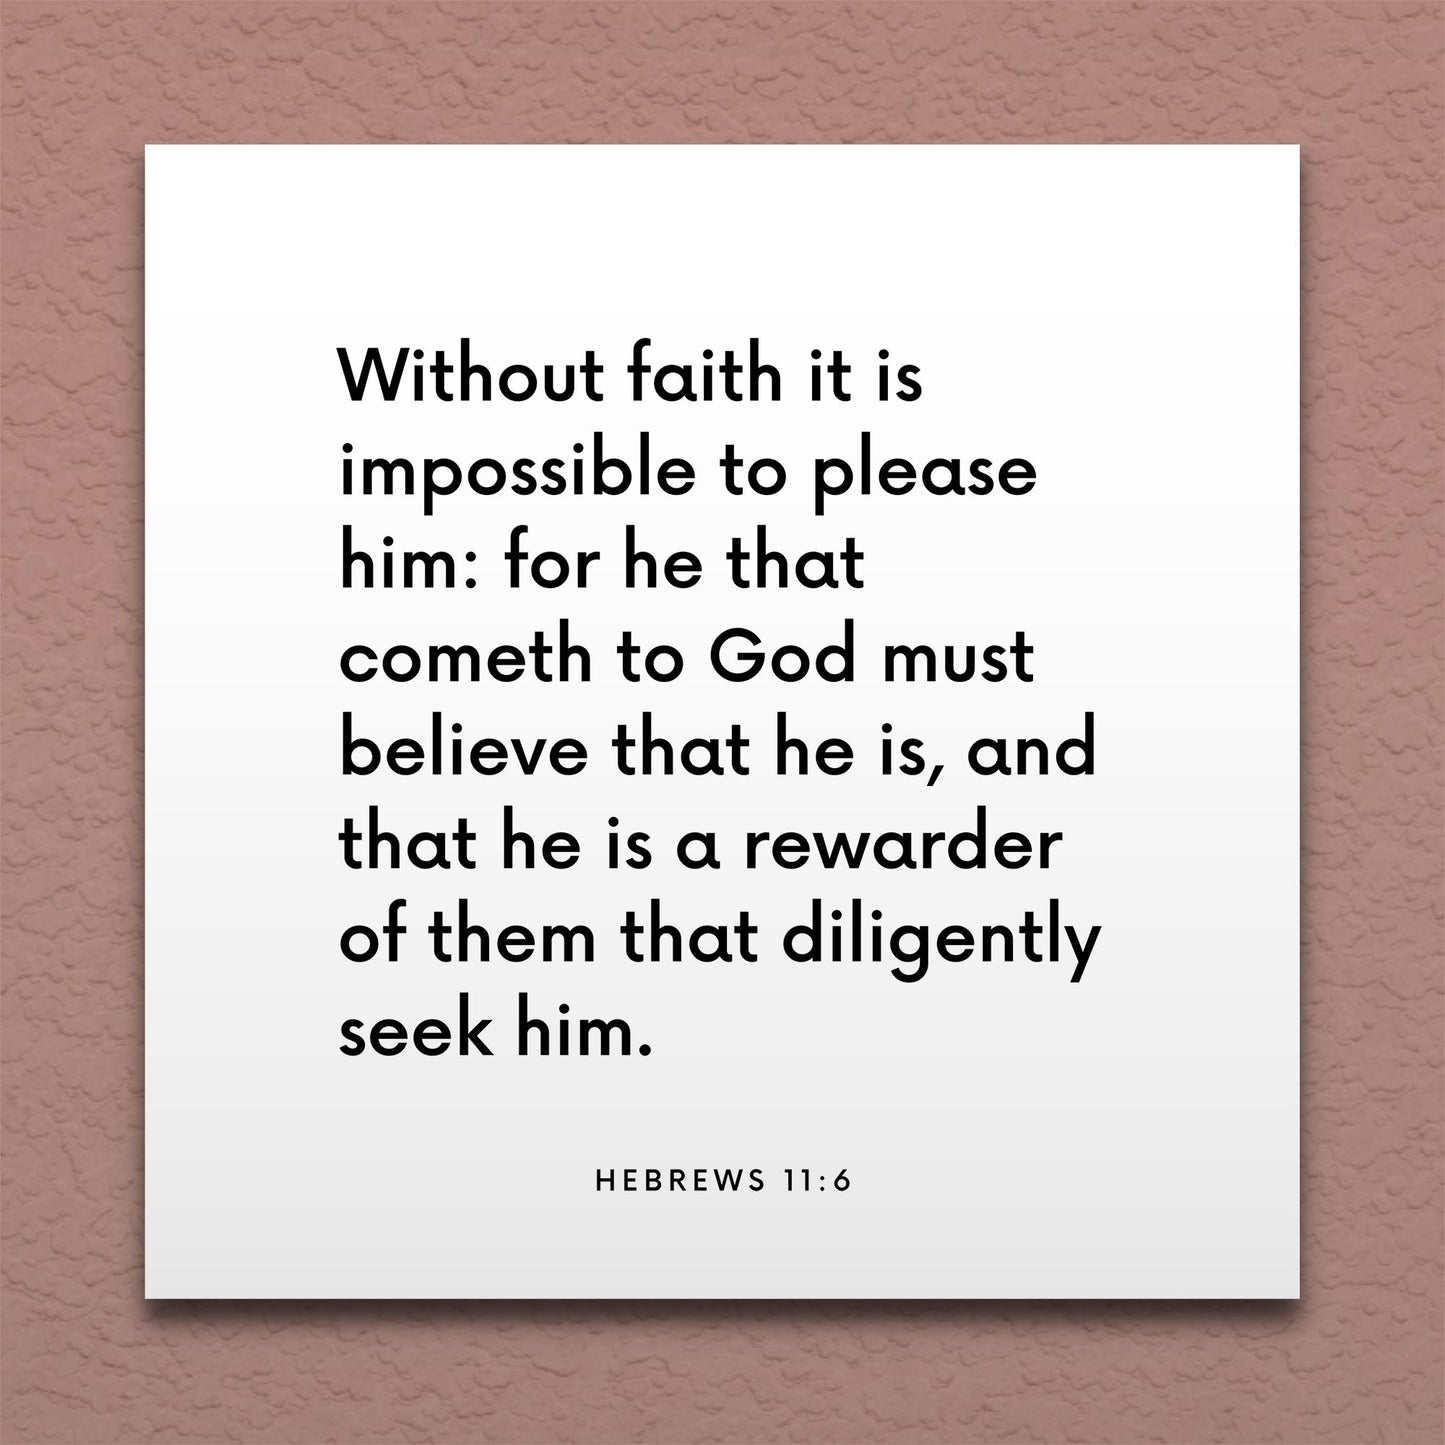 Wall-mounted scripture tile for Hebrews 11:6 - "Without faith it is impossible to please him"